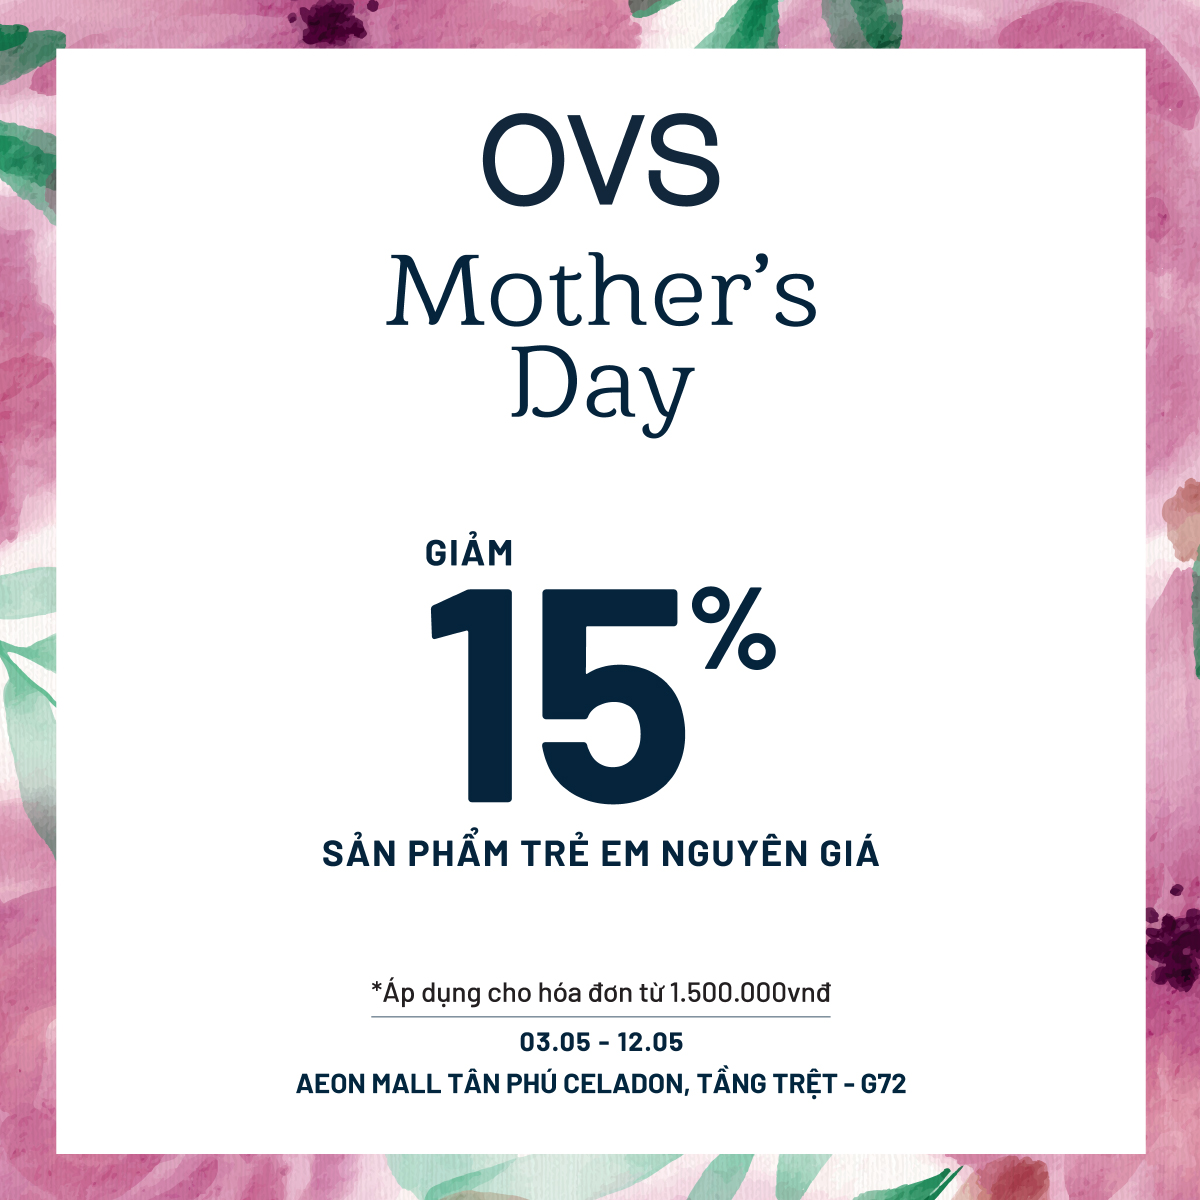 CELEBRATE MOTHER'S DAY WITH SPECIAL, DEALS FROM OVS AEON MALL TAN PHU CELADON